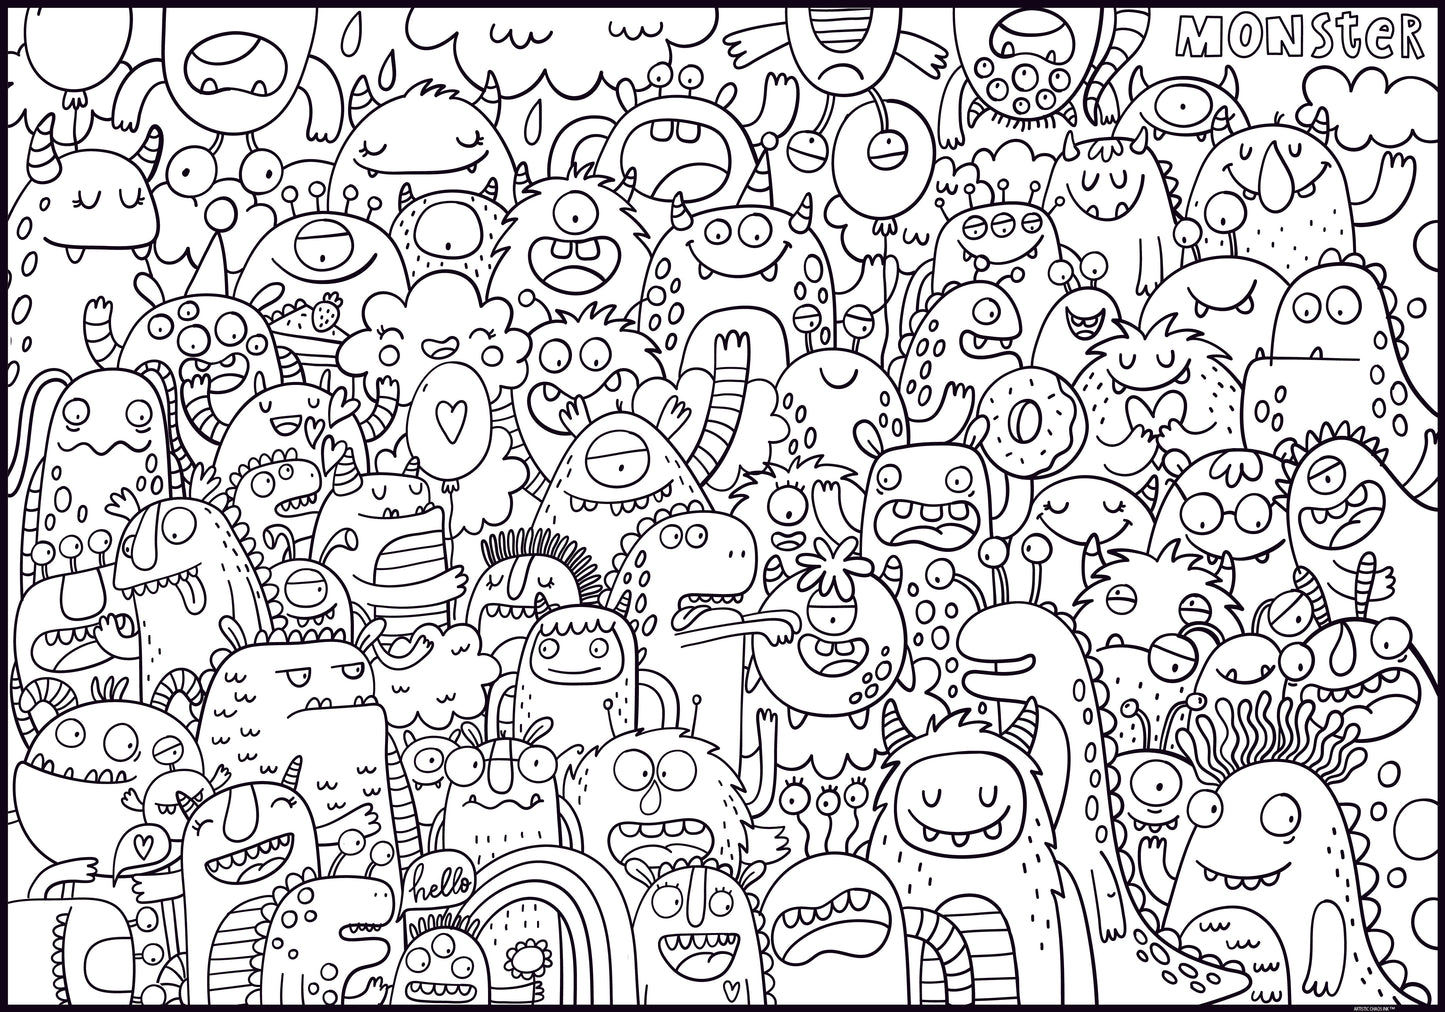 Premium Giant Monster Coloring Poster